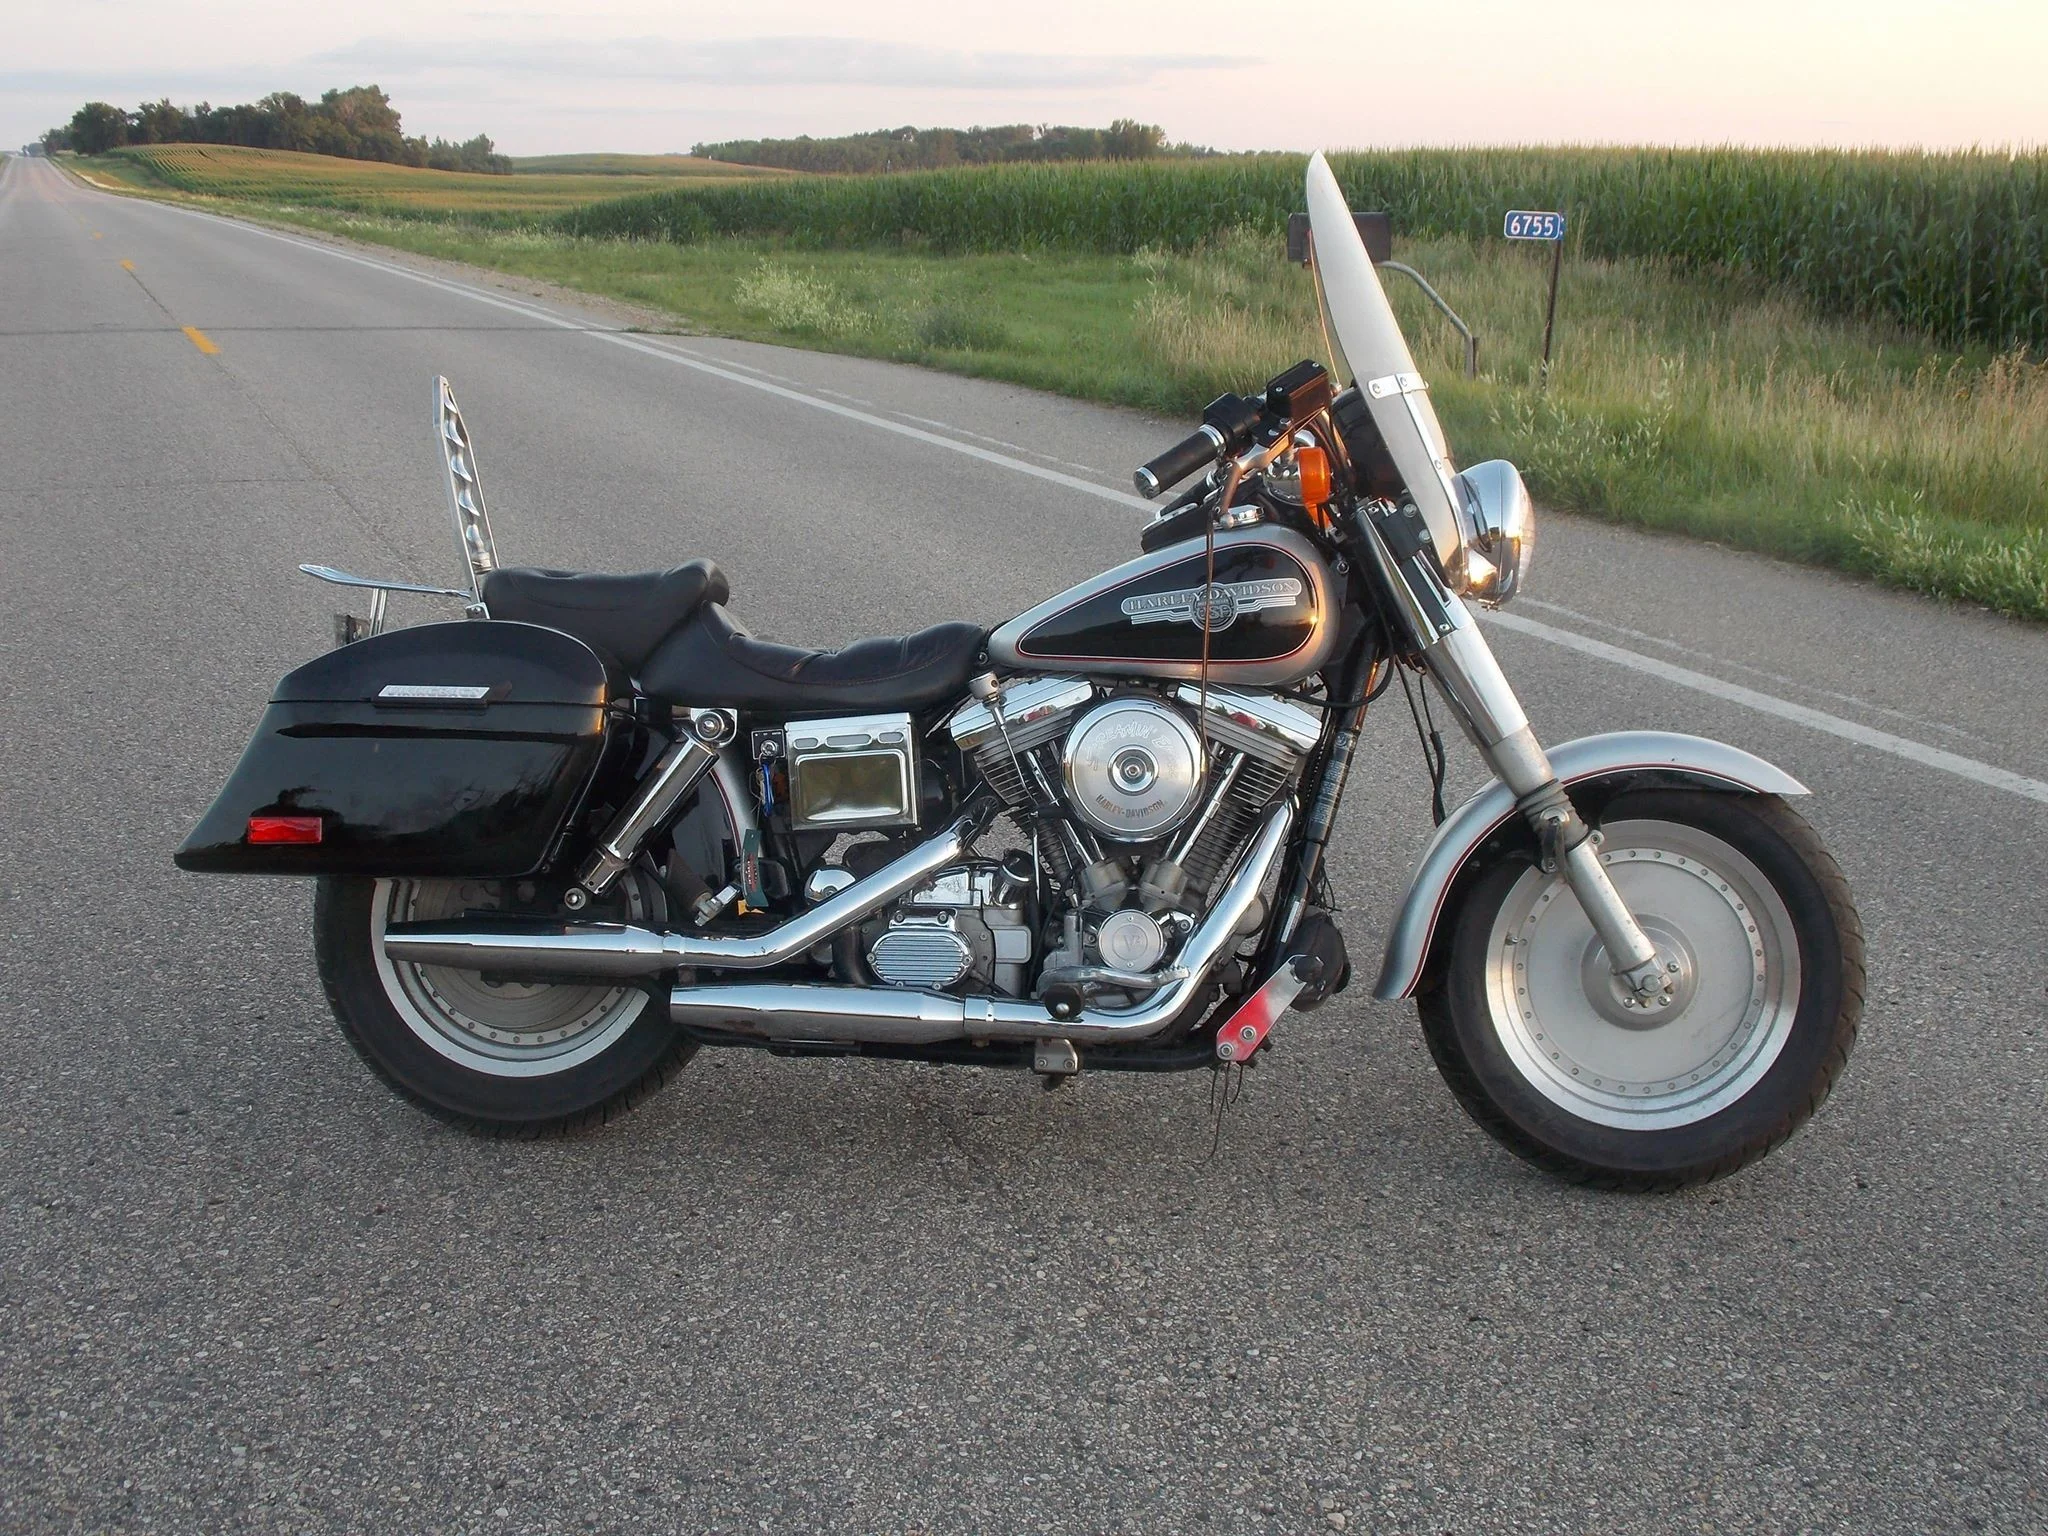 South Dakota Motorcycle Safety Features